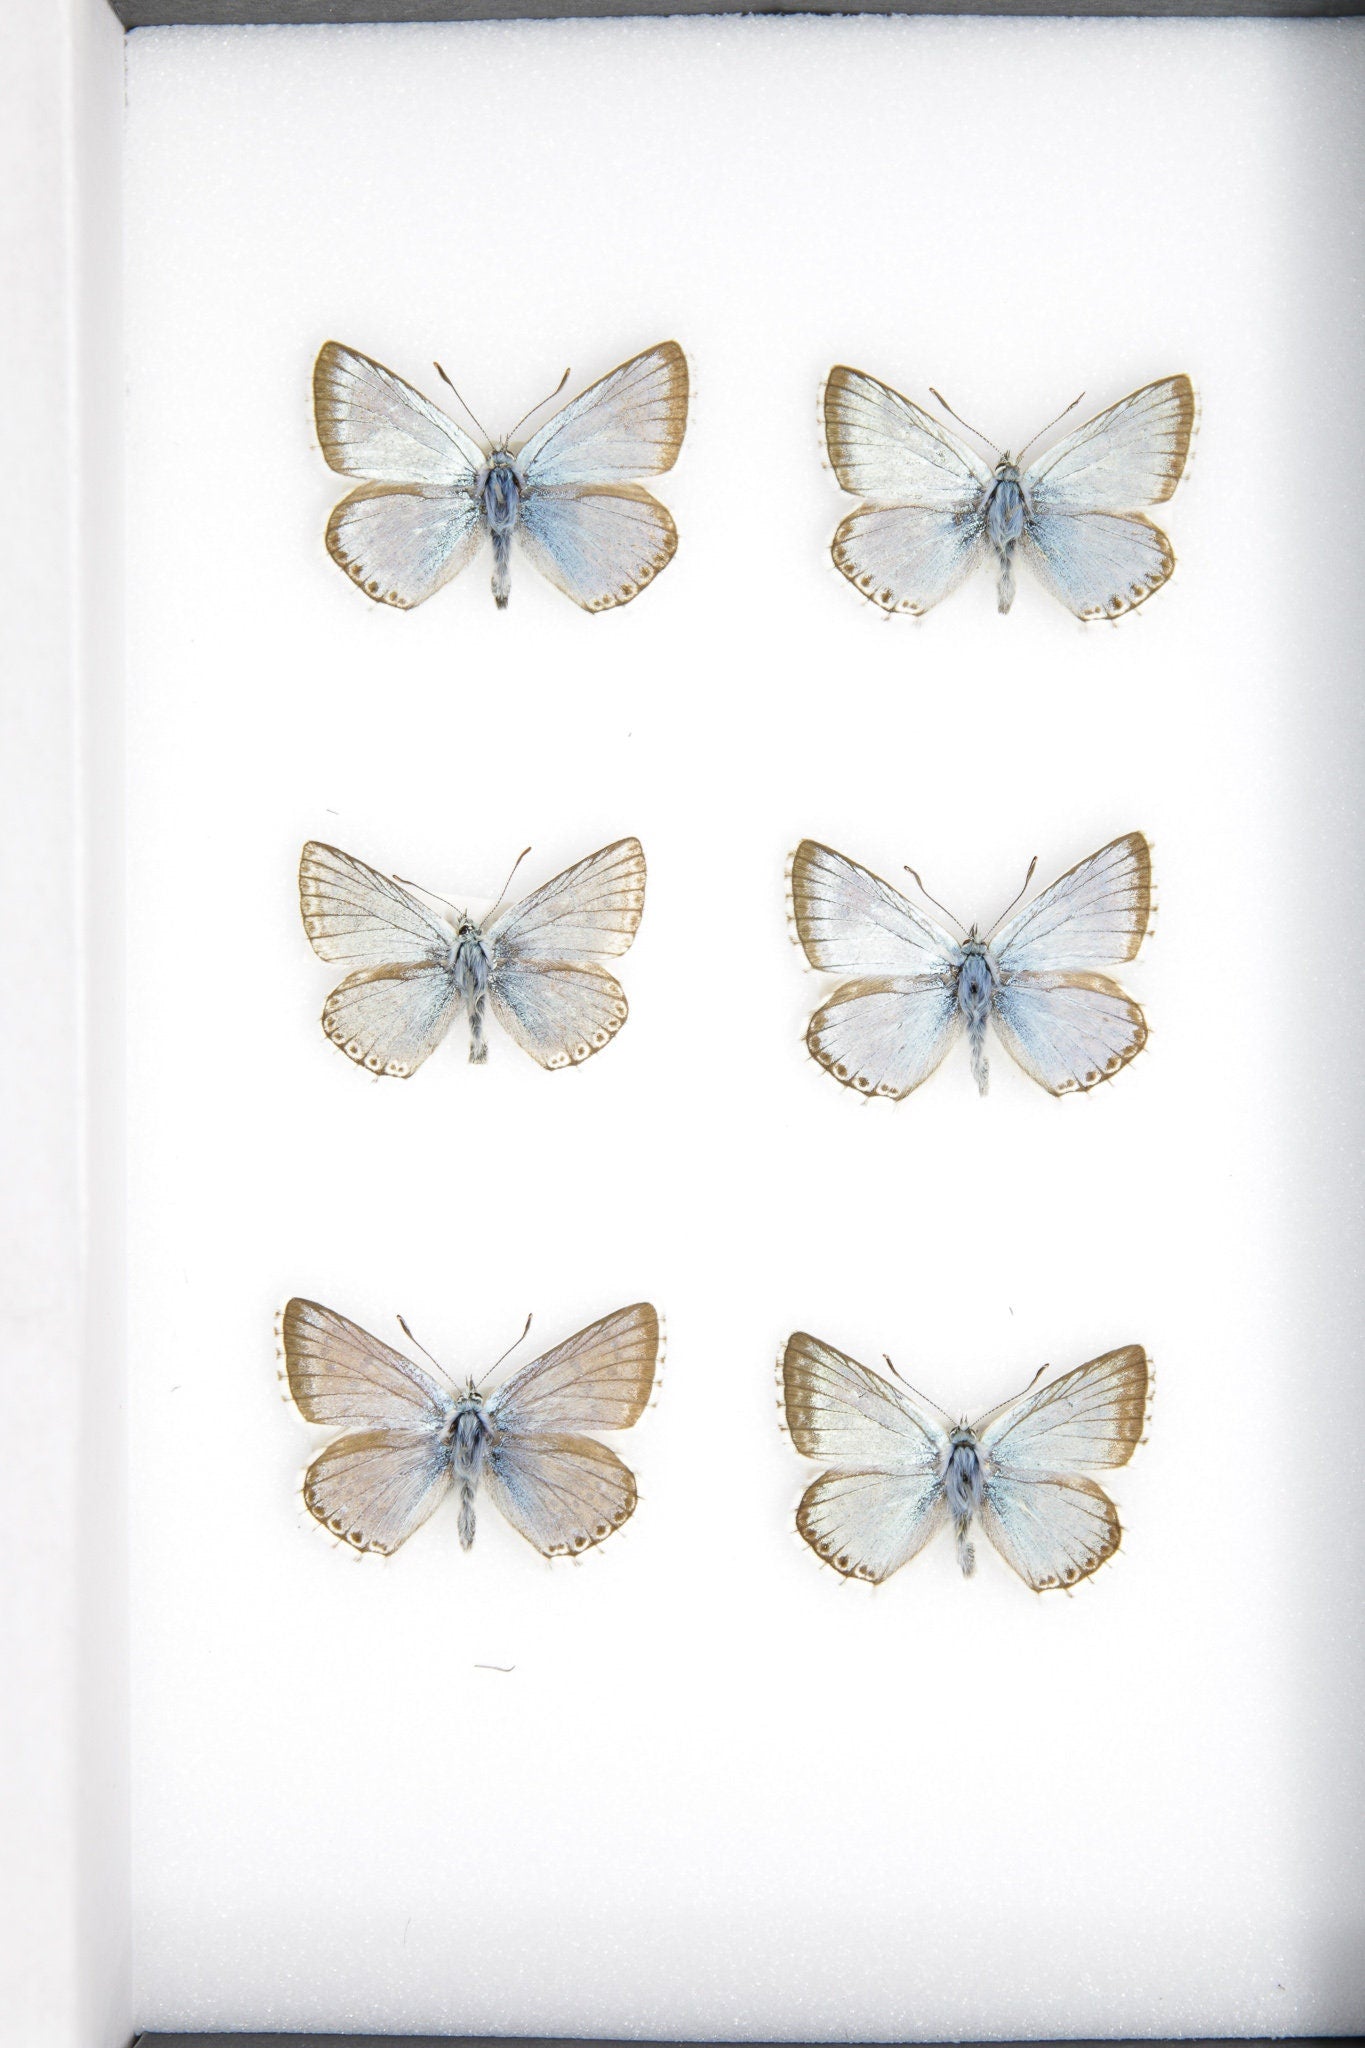 A Collection of Chalkhill Blue Butterflies (Lysandra coridon) with Scientific Collection Data, A1 Quality, Real Lepidoptera Specimens #SE05